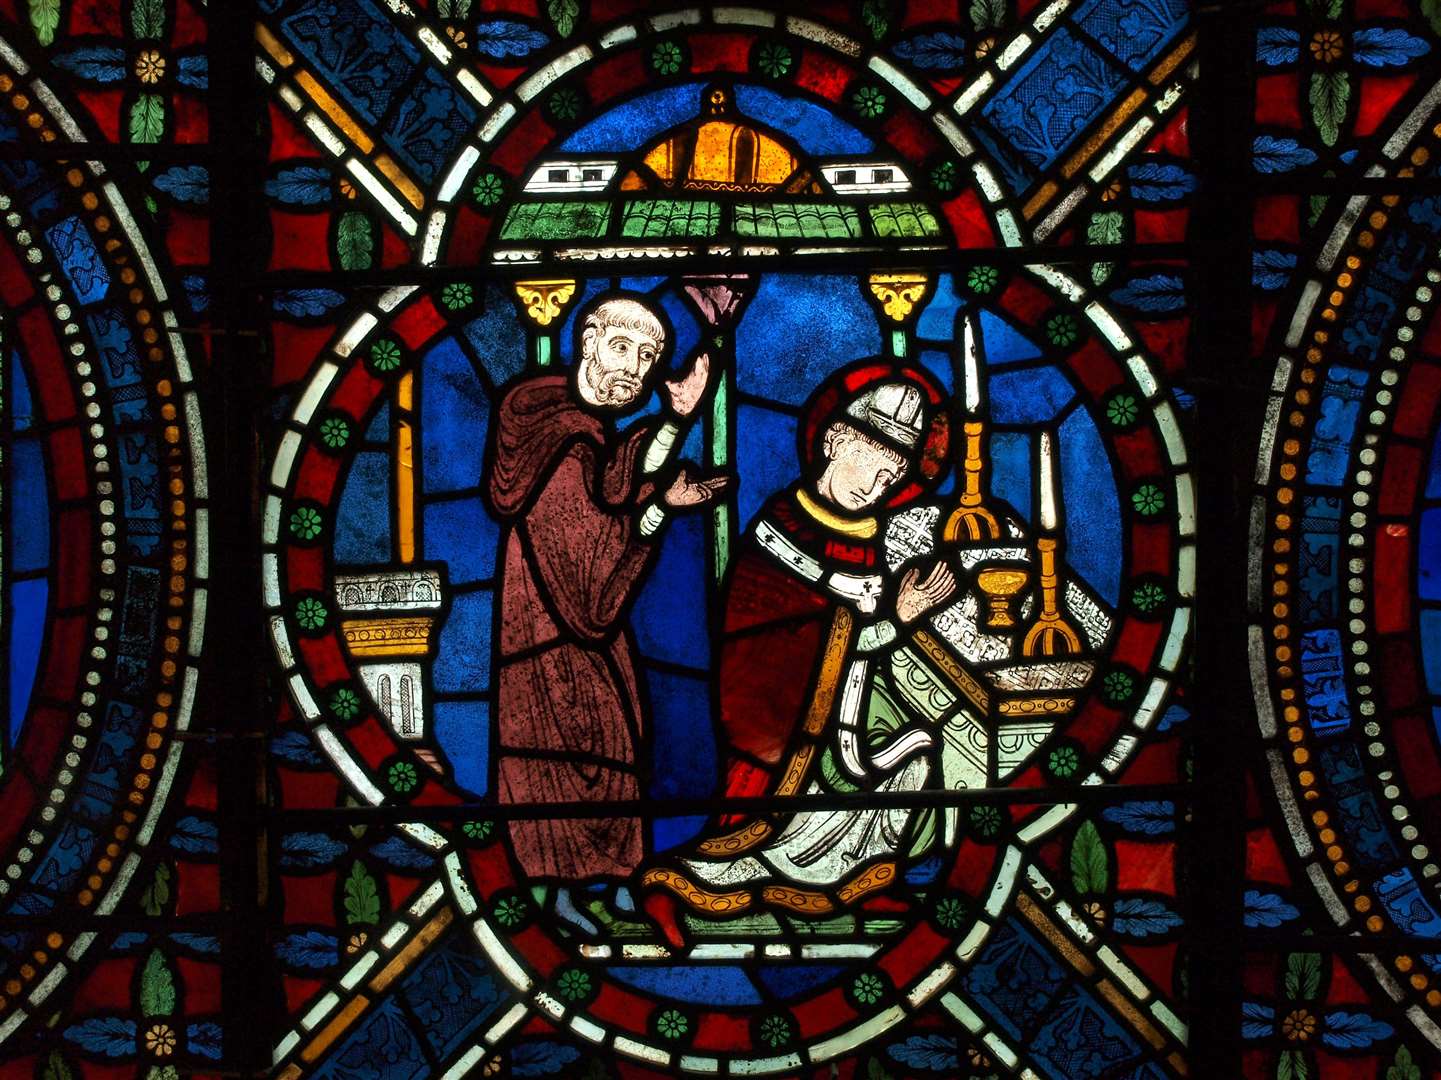 One of the stained glass windows depicting Thomas Becket